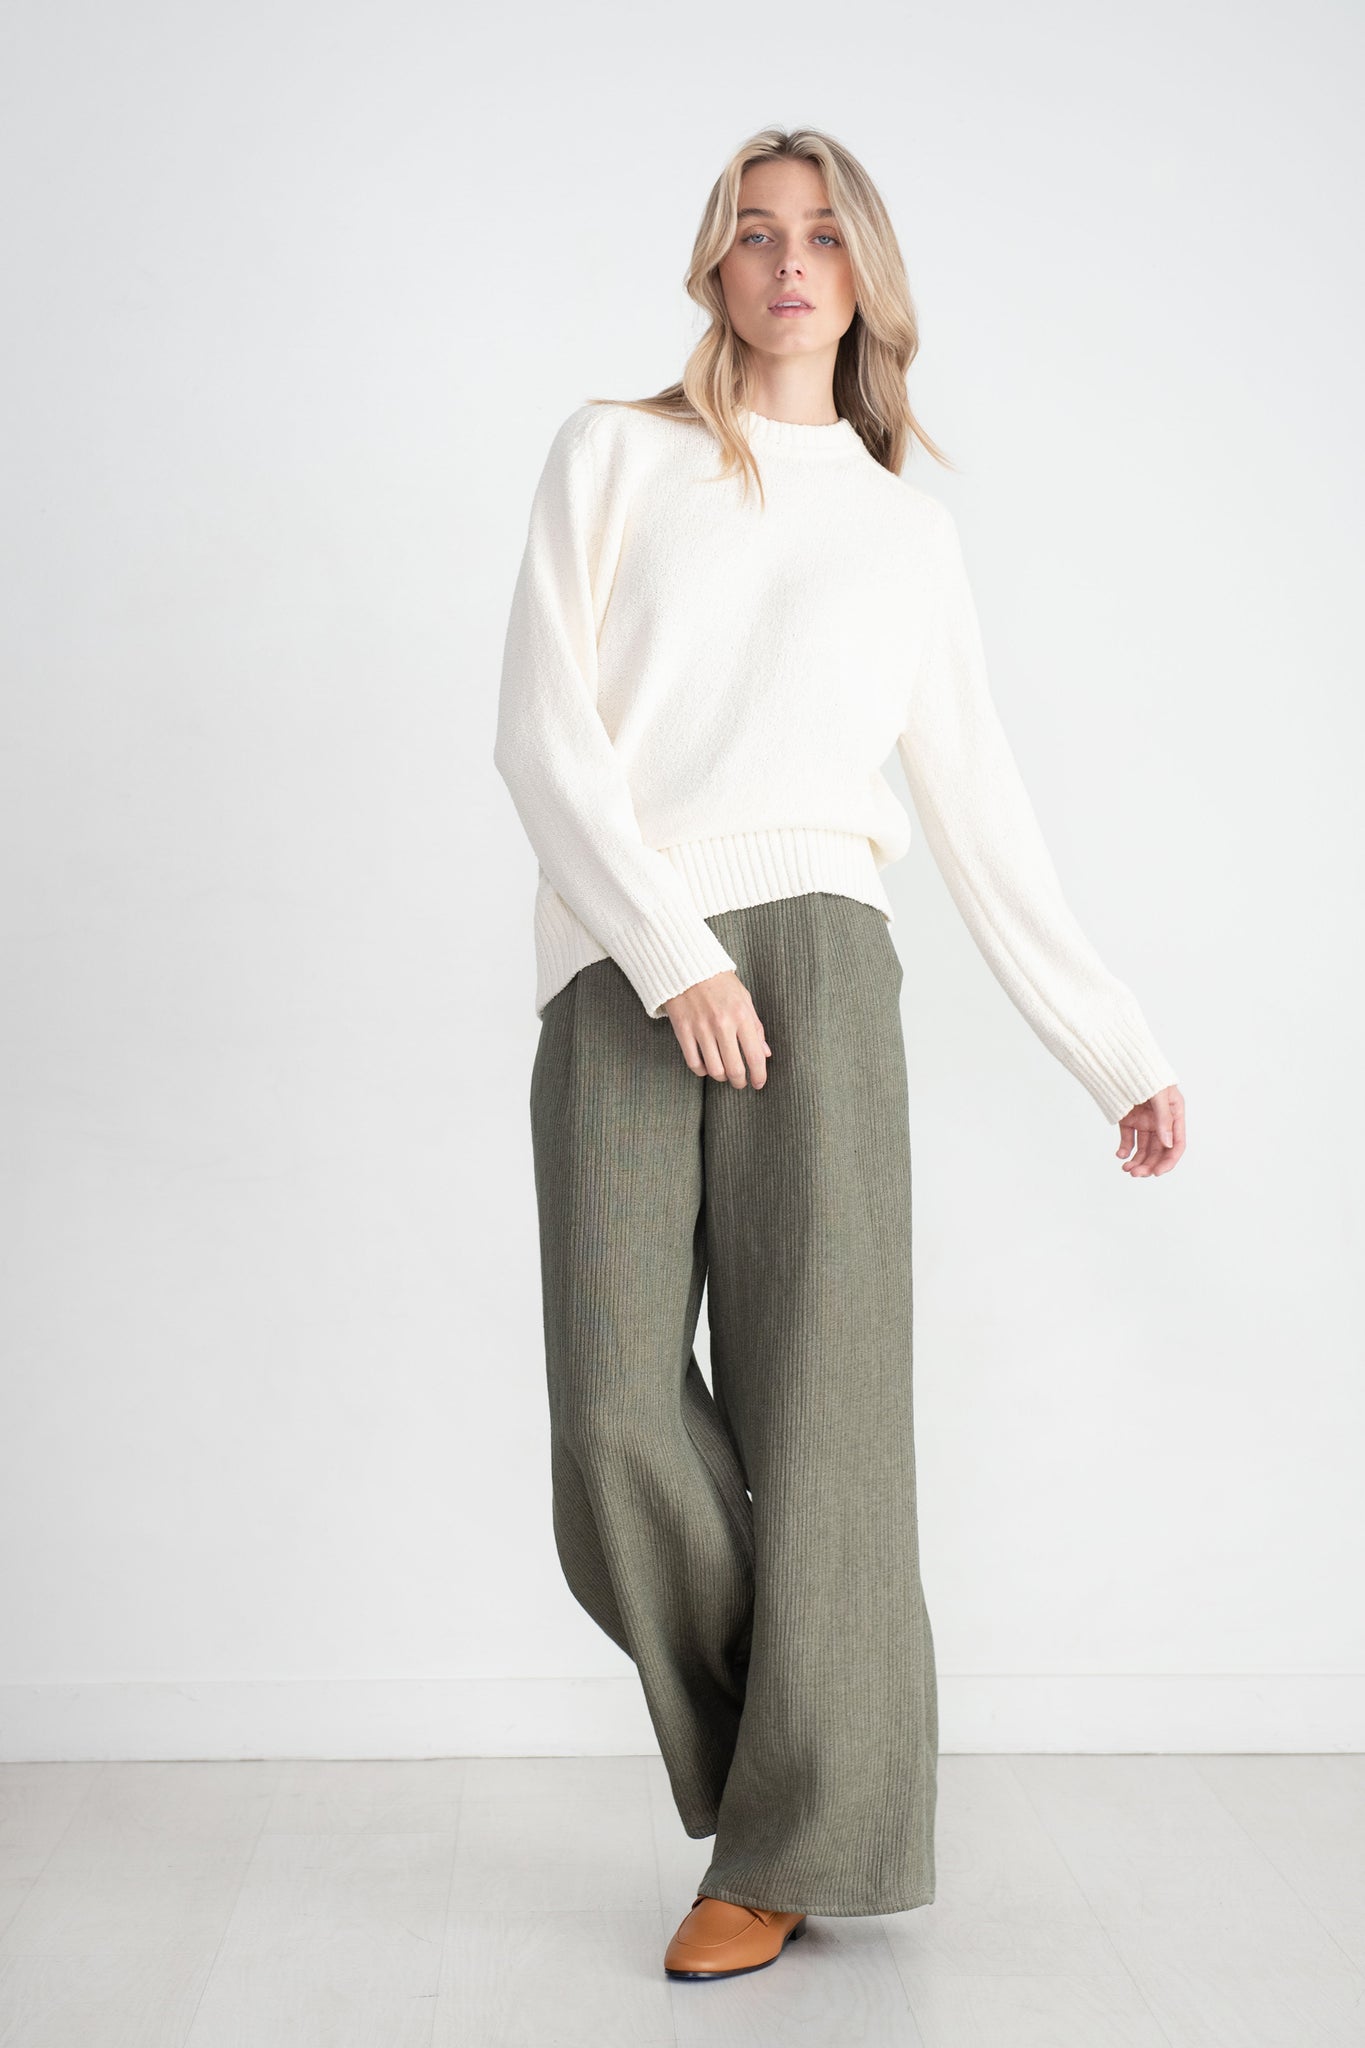 LOULOU STUDIO - Canillo Sweater, Rice Ivory